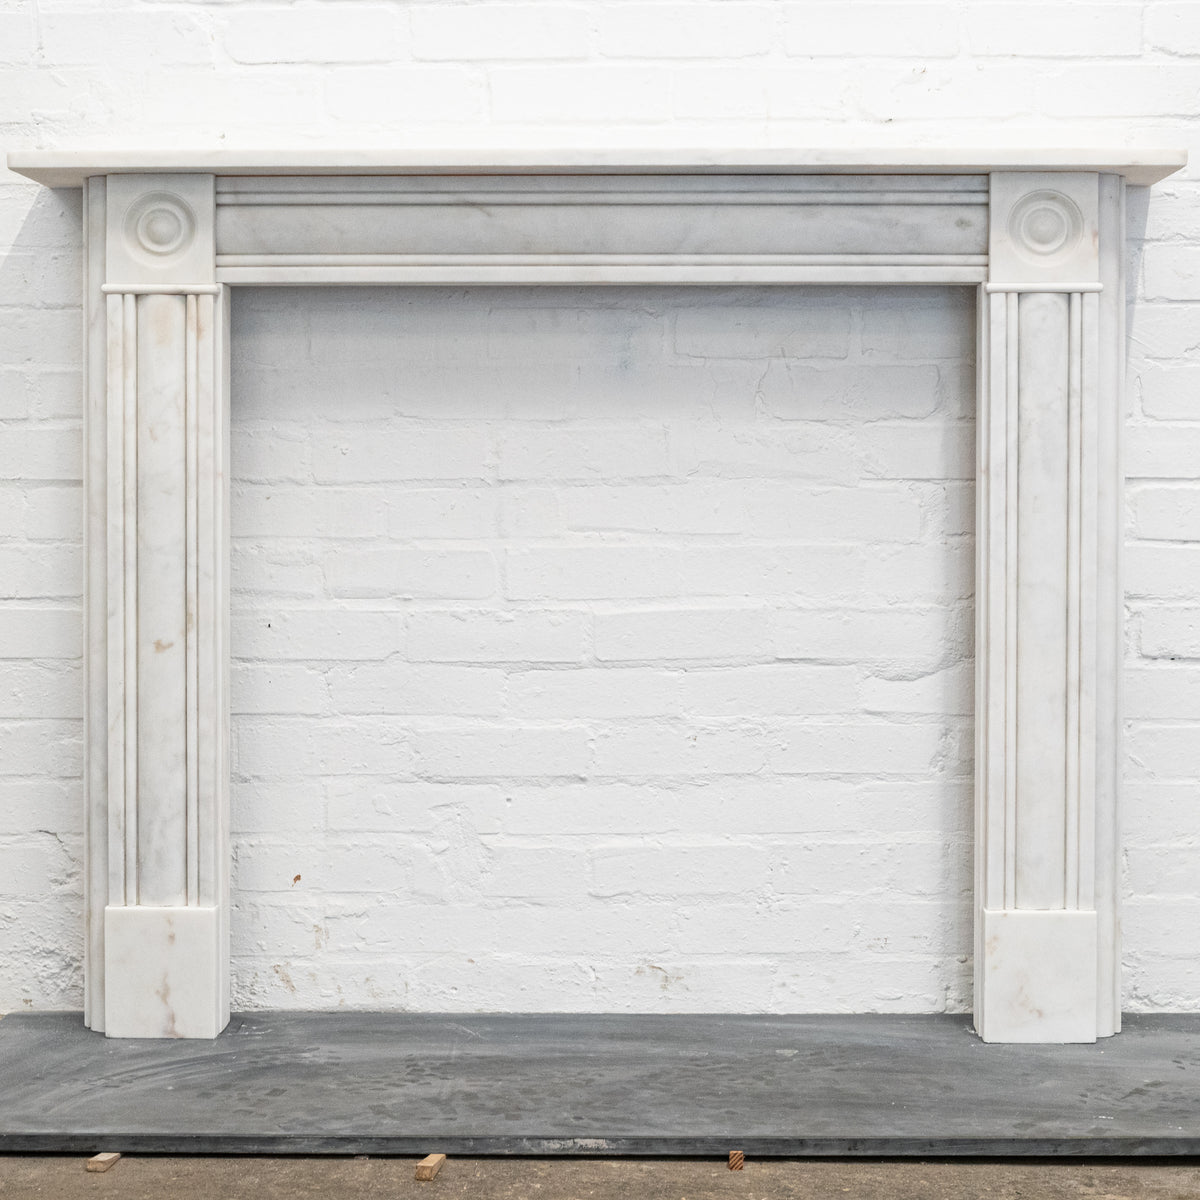 Georgian Style Bullseye Fireplace Surrounds | Various Options | The Architectural Forum